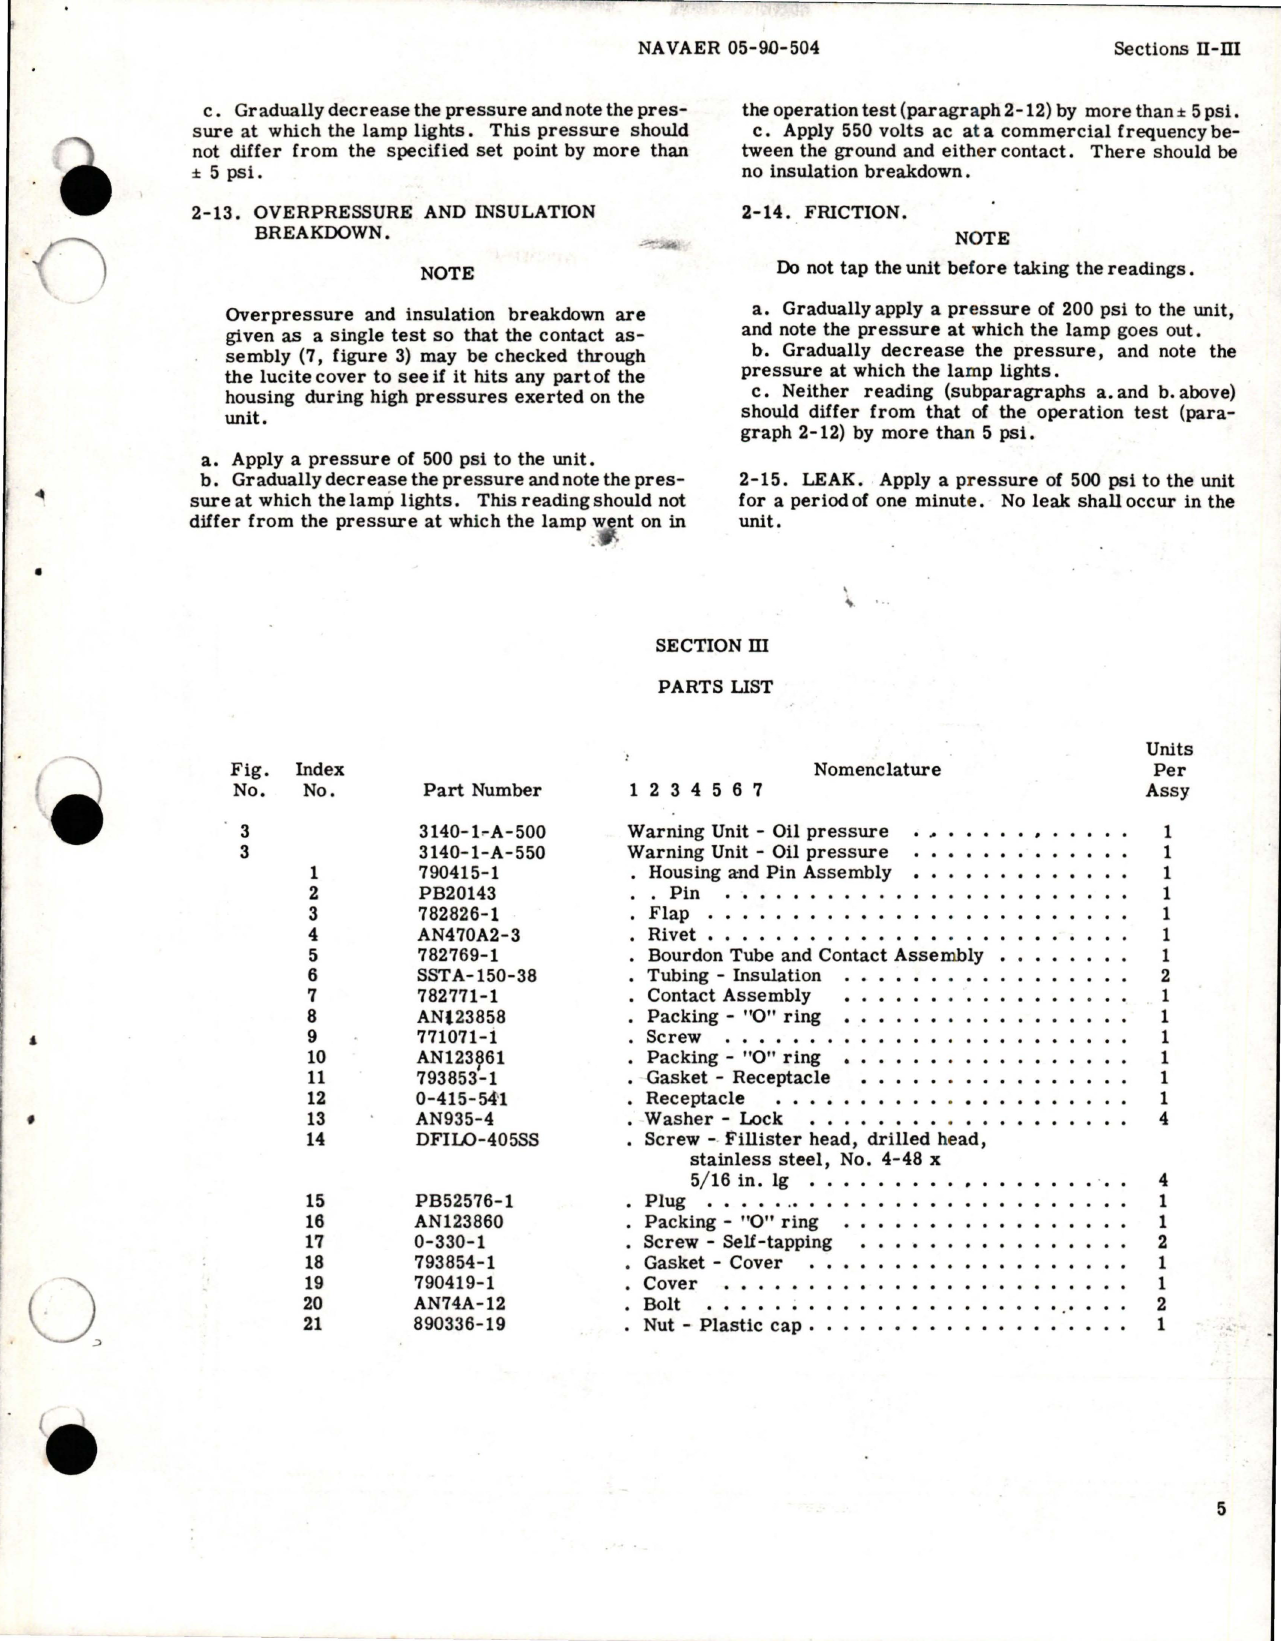 Sample page 7 from AirCorps Library document: Operation, Service and Overhaul with Parts for Oil Pressure Warning Unit - Parts 3140-1-A-500 and 3140-1-A-550